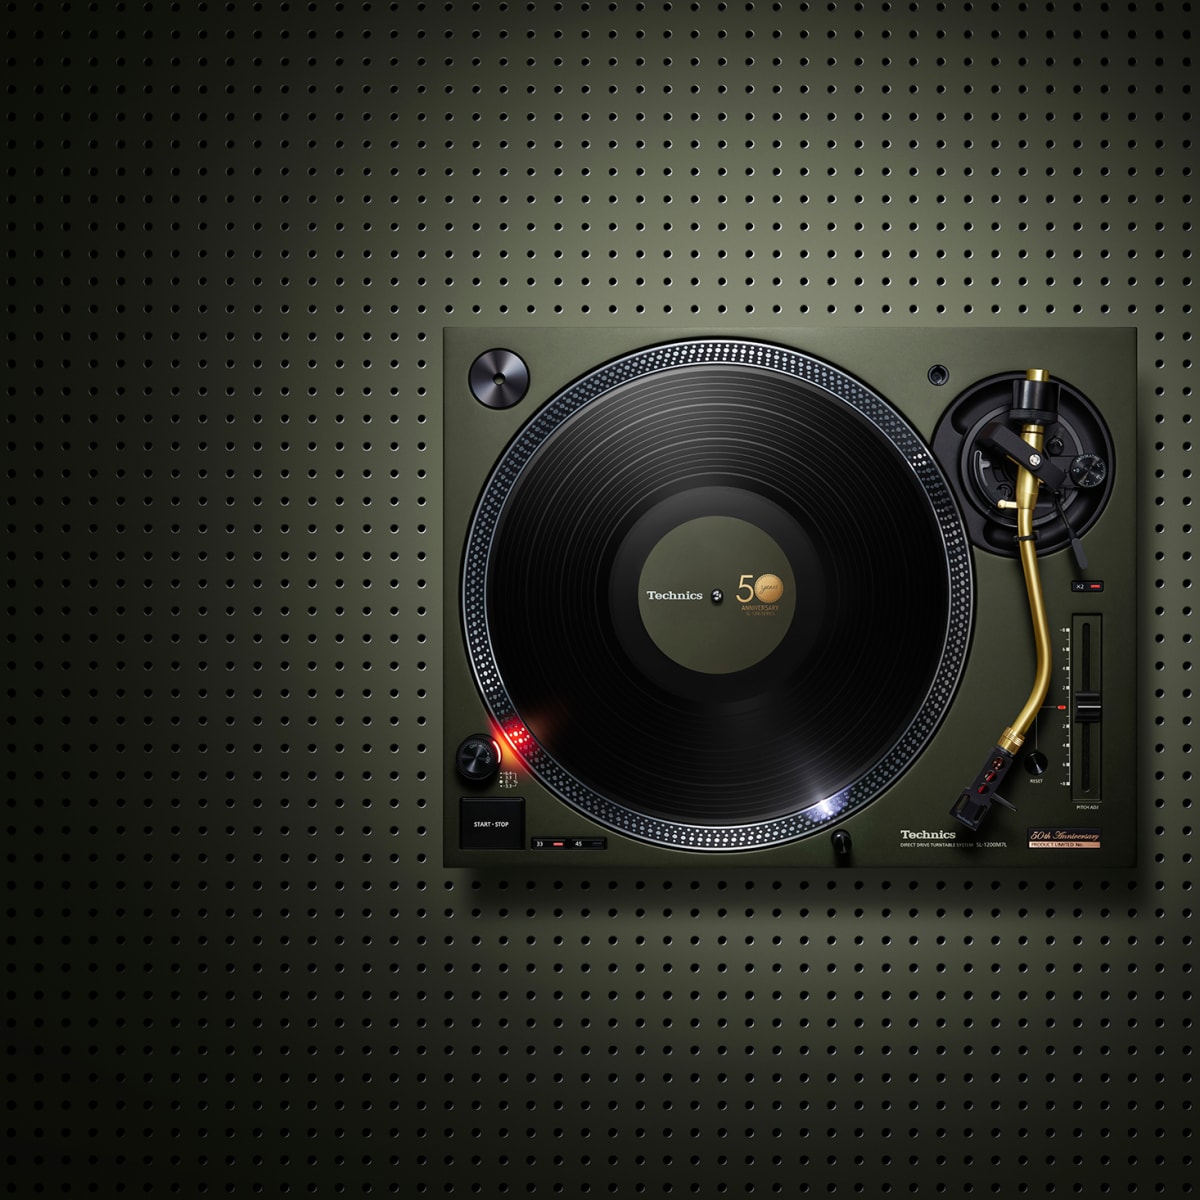 The Technics SL-1200 turns 50 and gets a limited run of new colors 